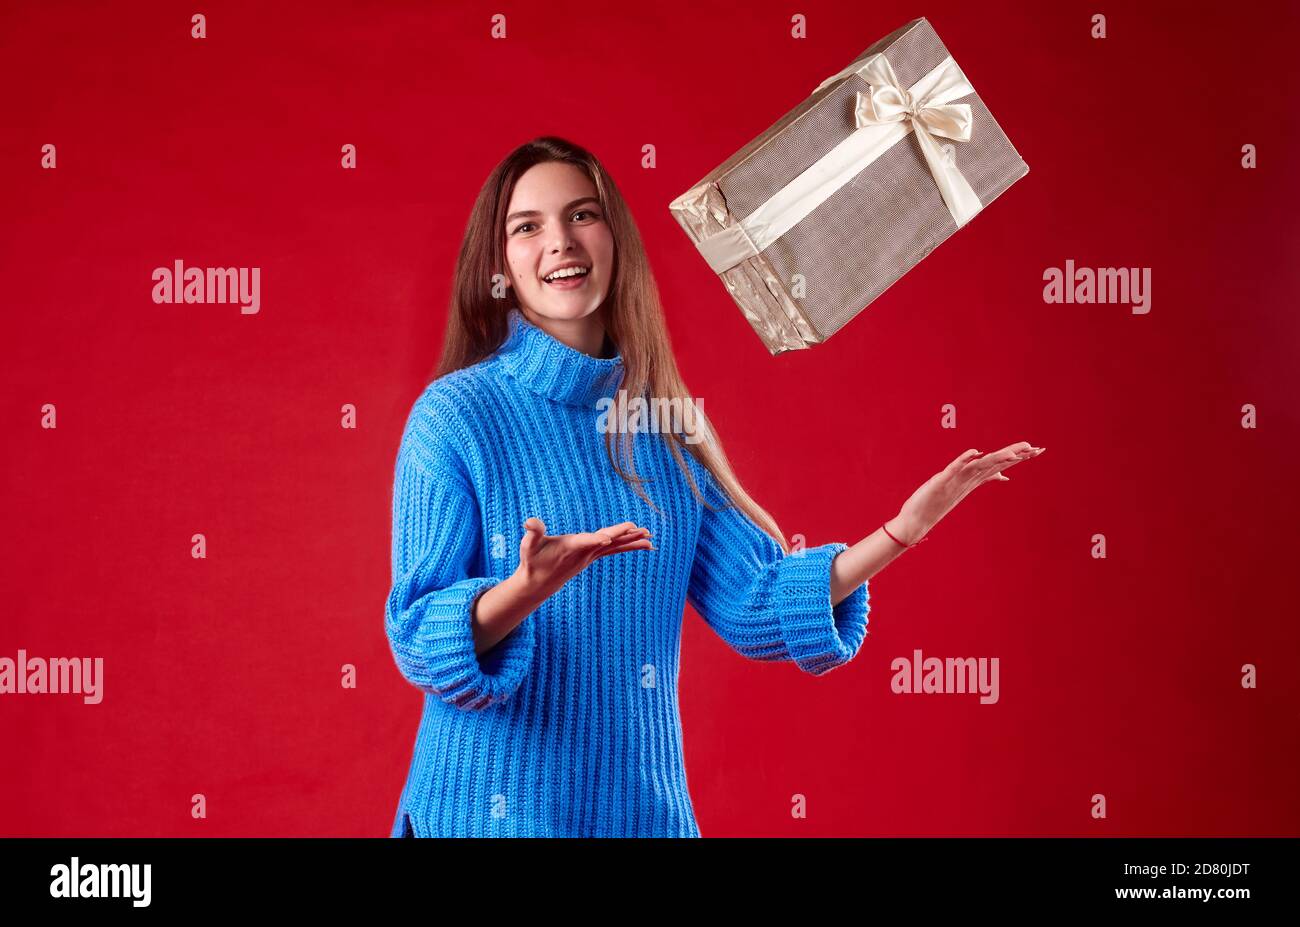 girl in a blue sweater catches gifts in the air on a red background. Stock Photo